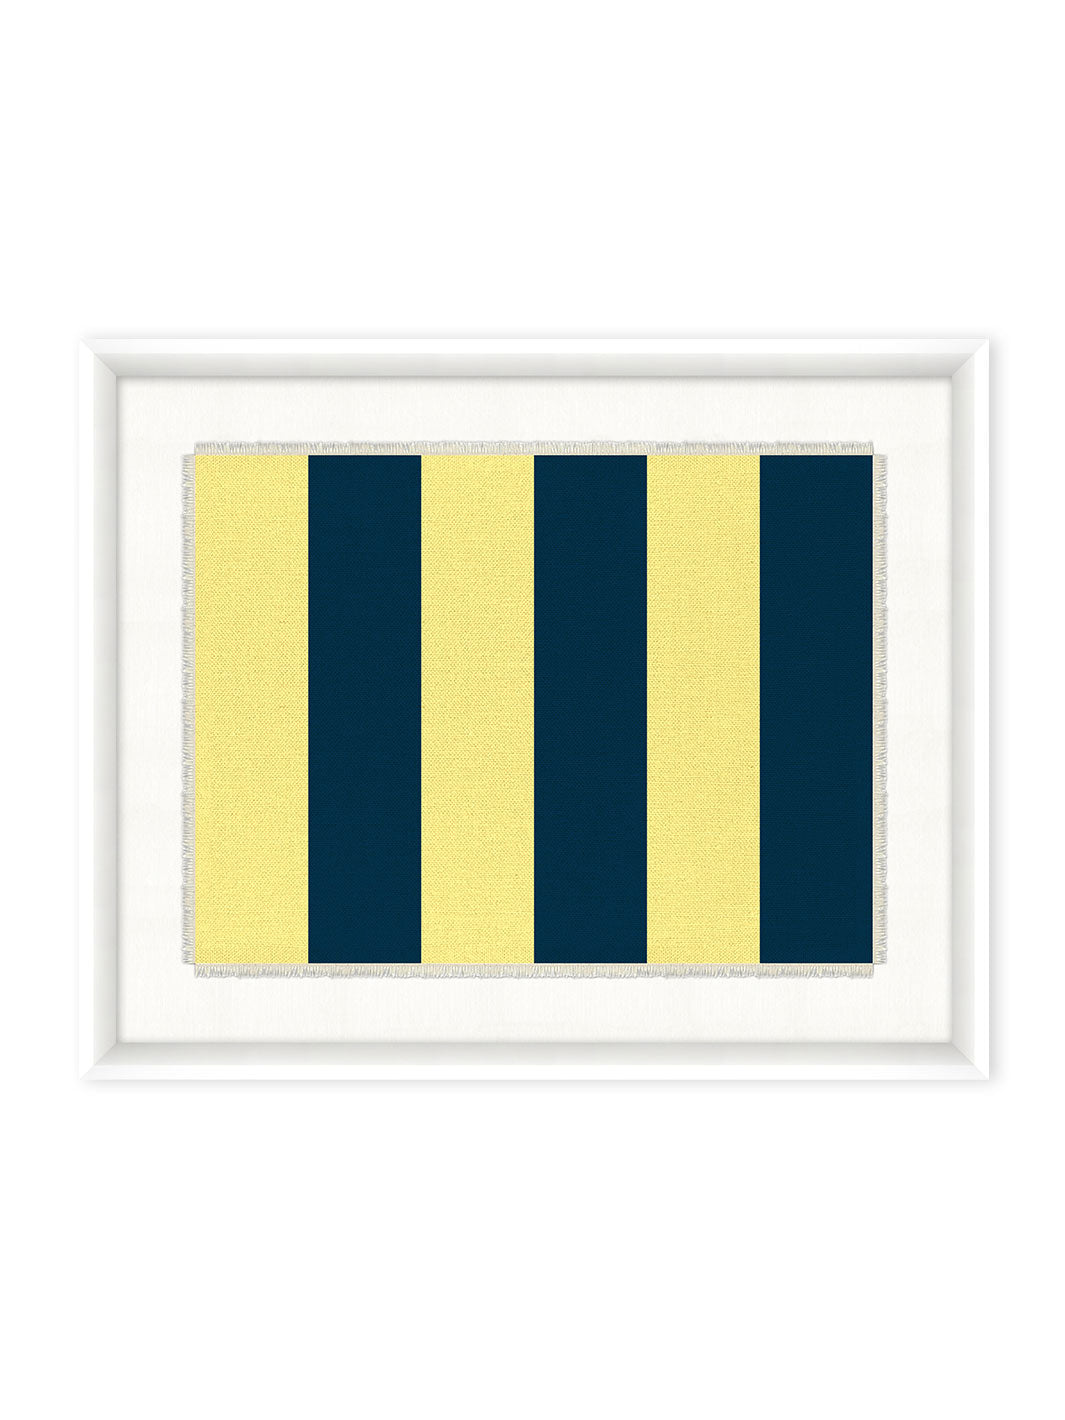 'Nautical Flag Textile 7' on Canvas by Nathan Turner Framed Art